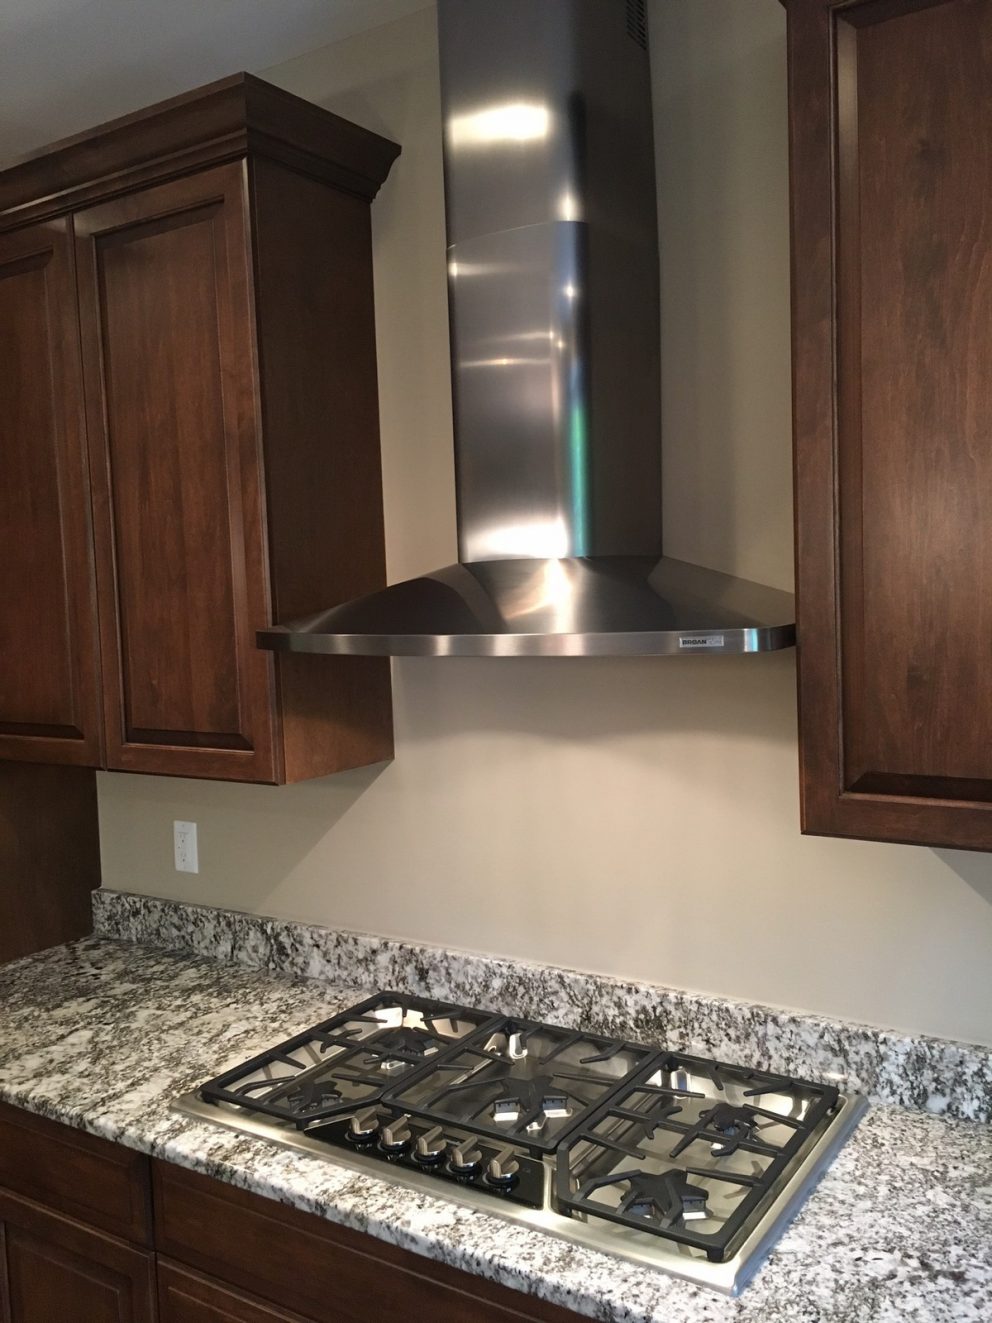 Gas cook top in granite counter top with stainless steel hood vent